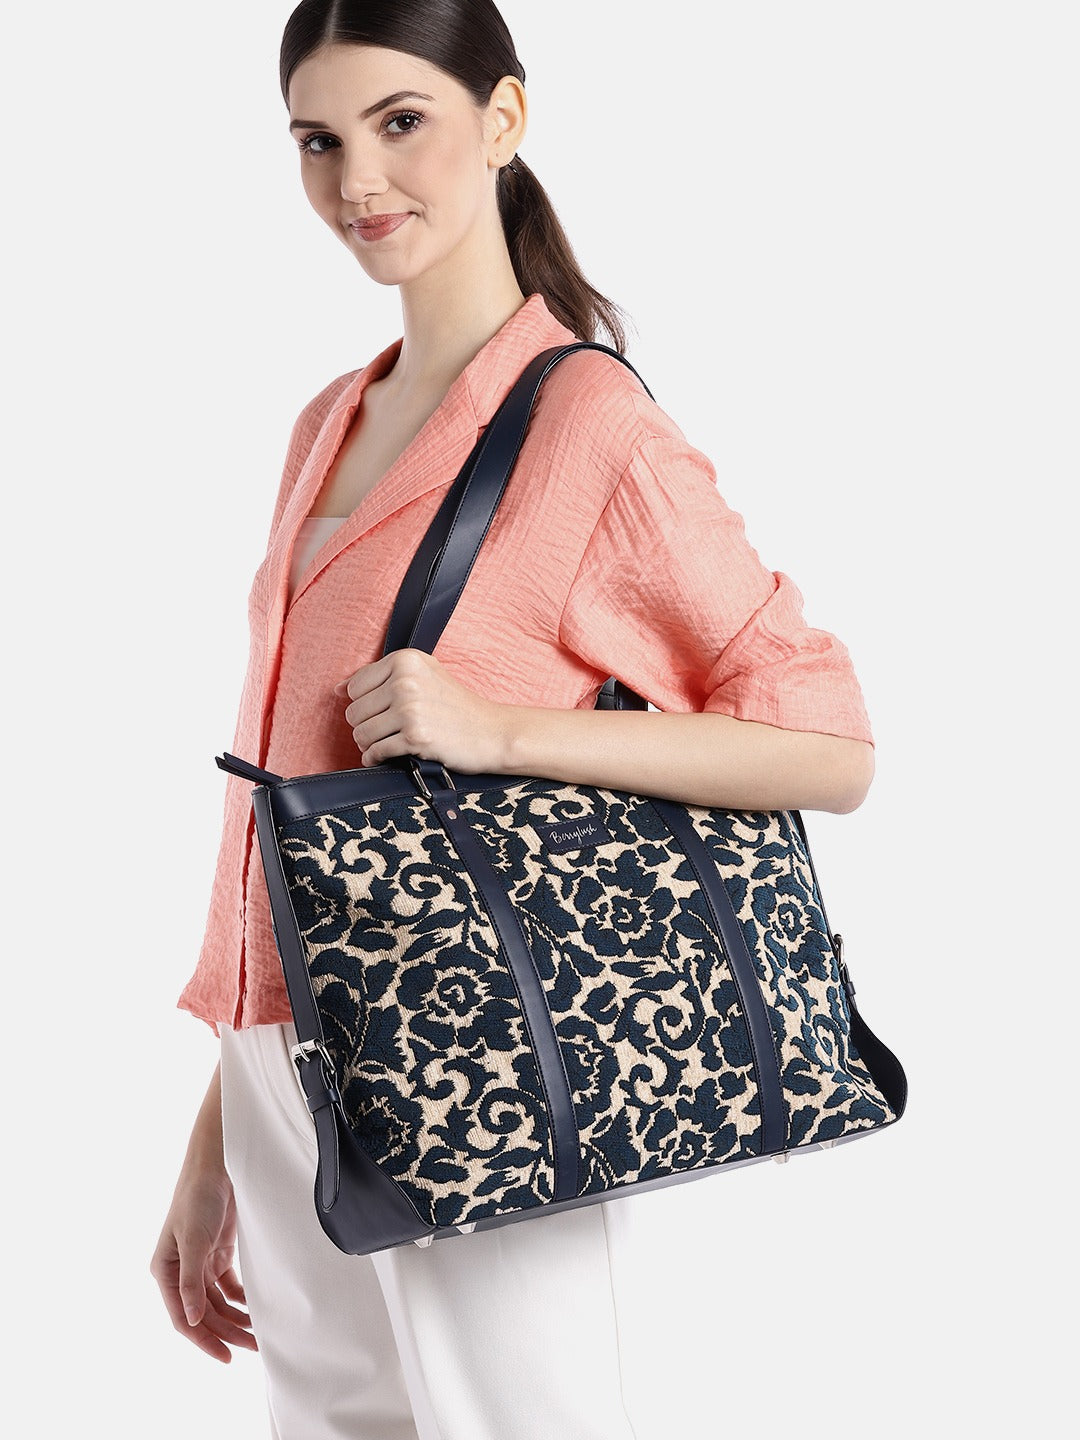 Women Off-White & Blue Floral Printed Structured Regular Laptop Bags ...